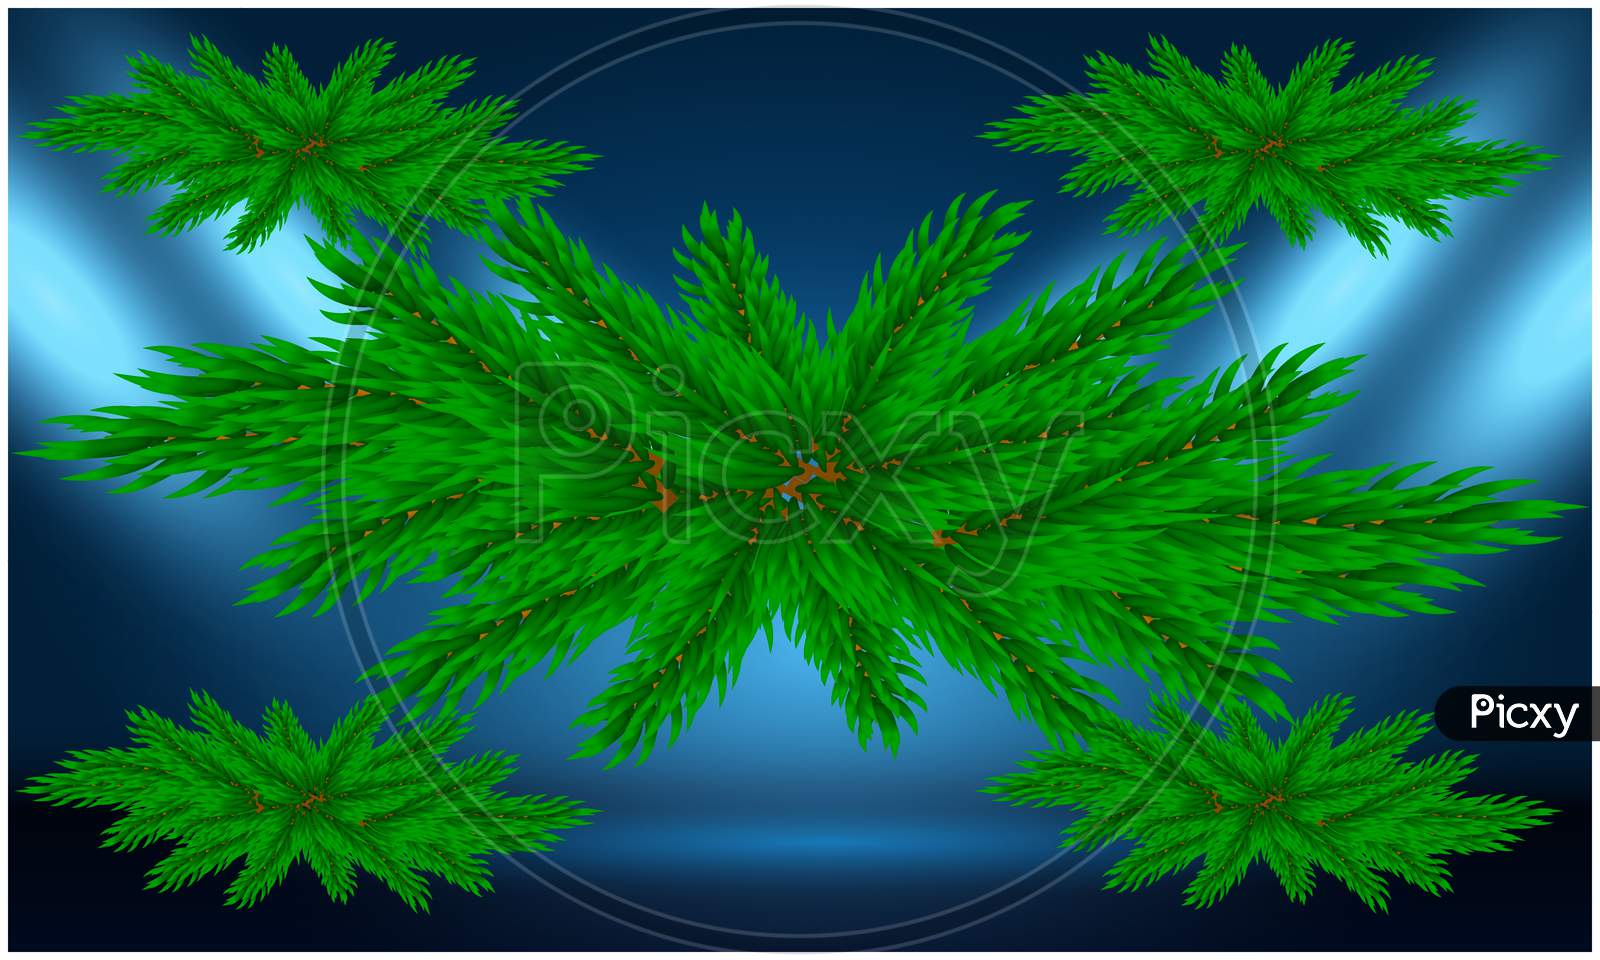 Abstract Design Of Christmas Leaves On Dark Background